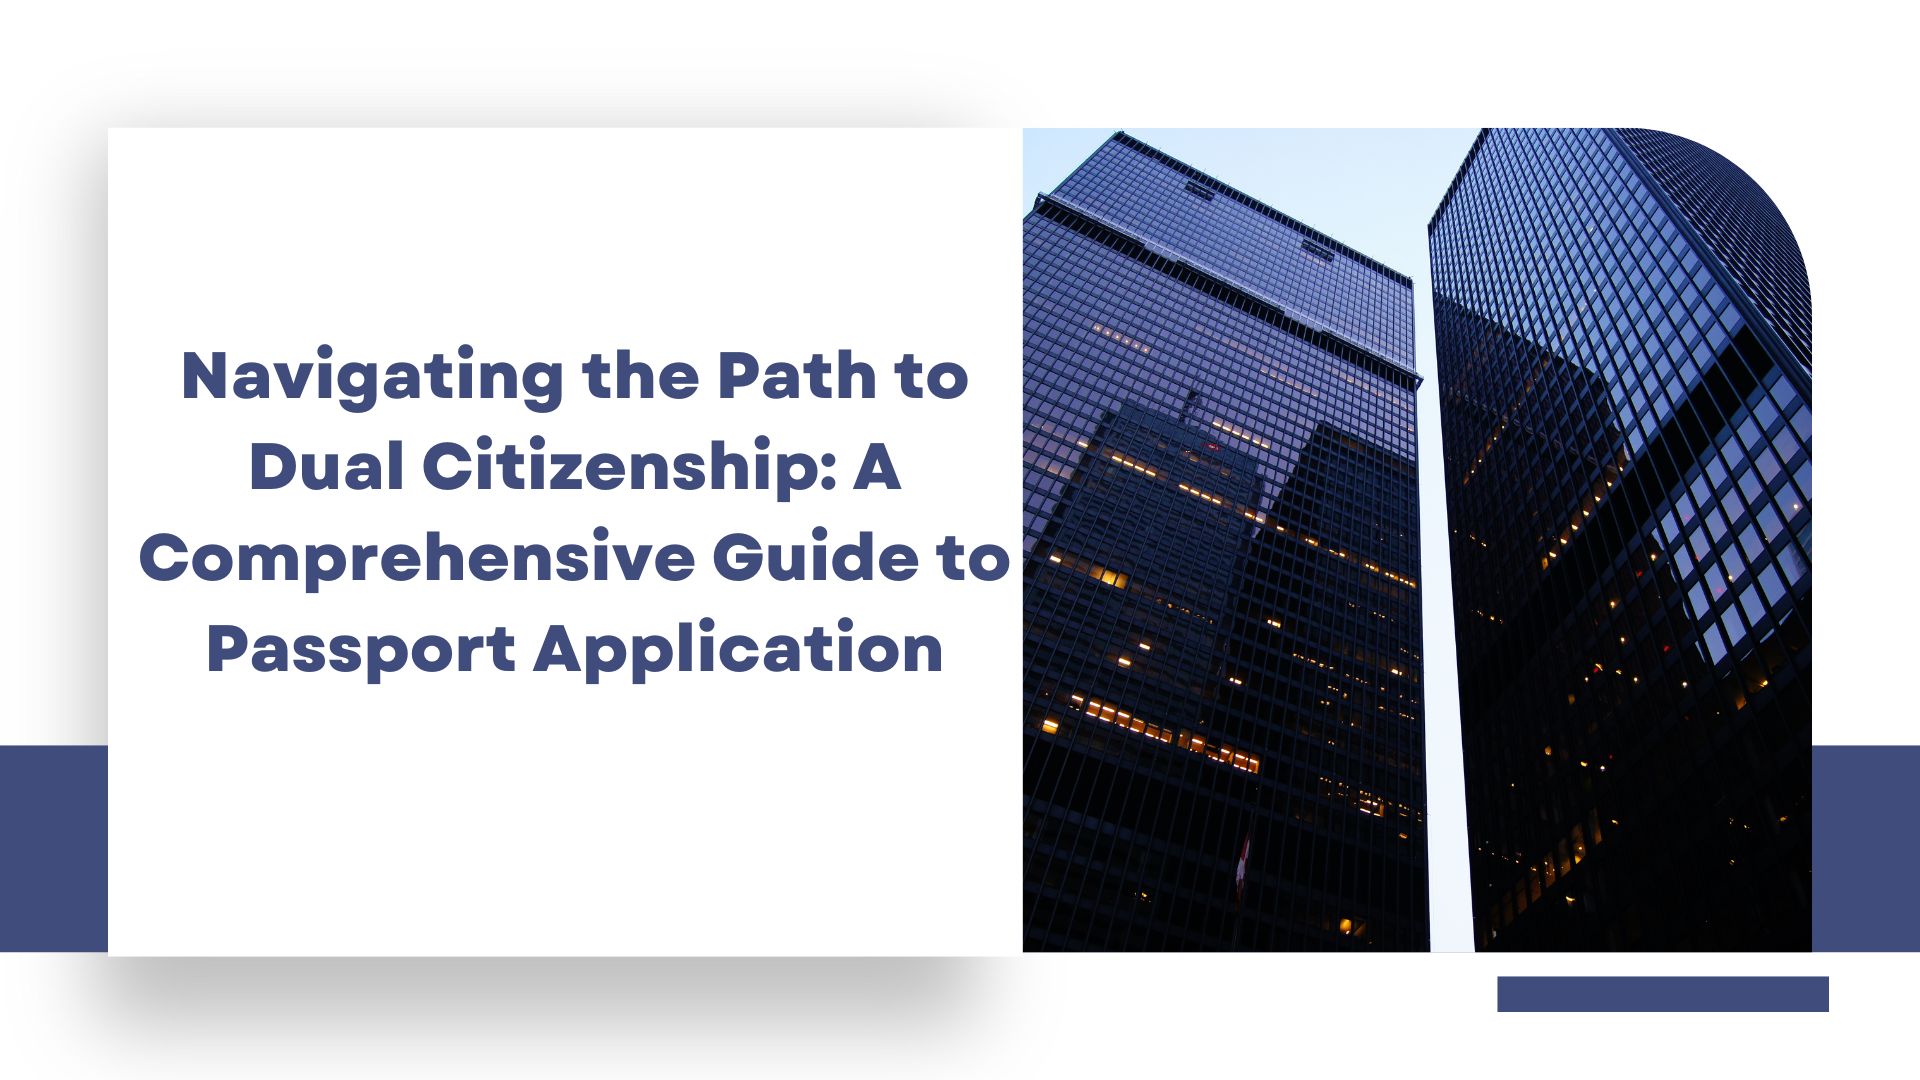 Navigating the Path to Dual Citizenship: A Comprehensive Guide to Passport Application